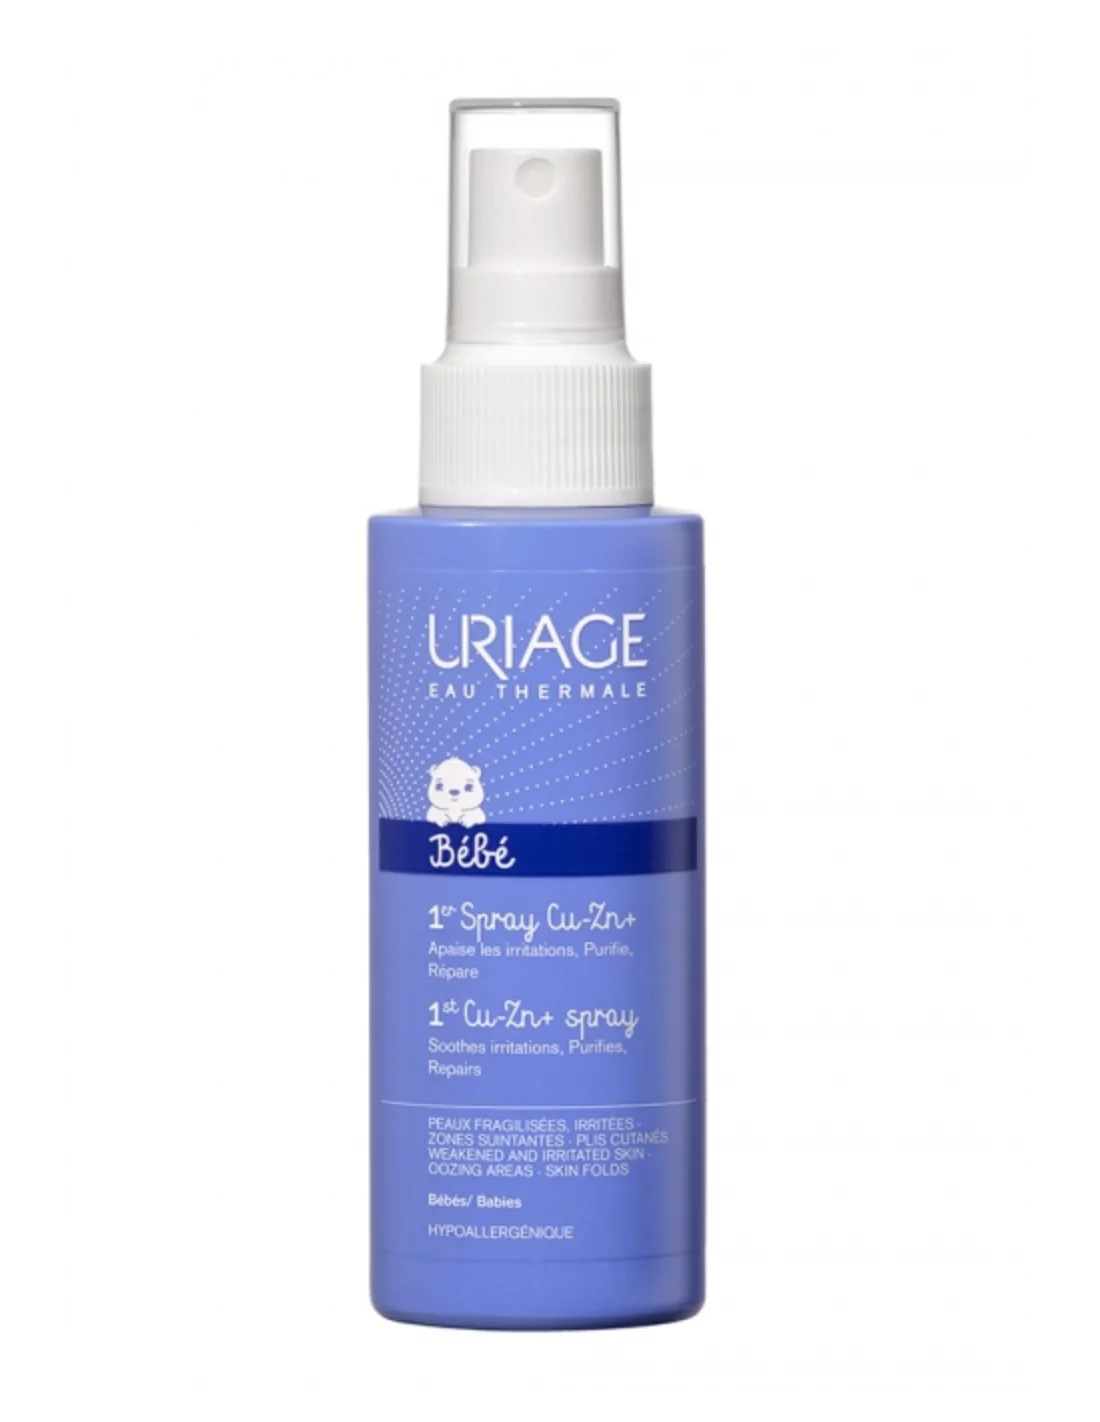 EAU THERMALE - Spray Nasal 100% Eau Thermale d'Uriage - Les soins - Uriage